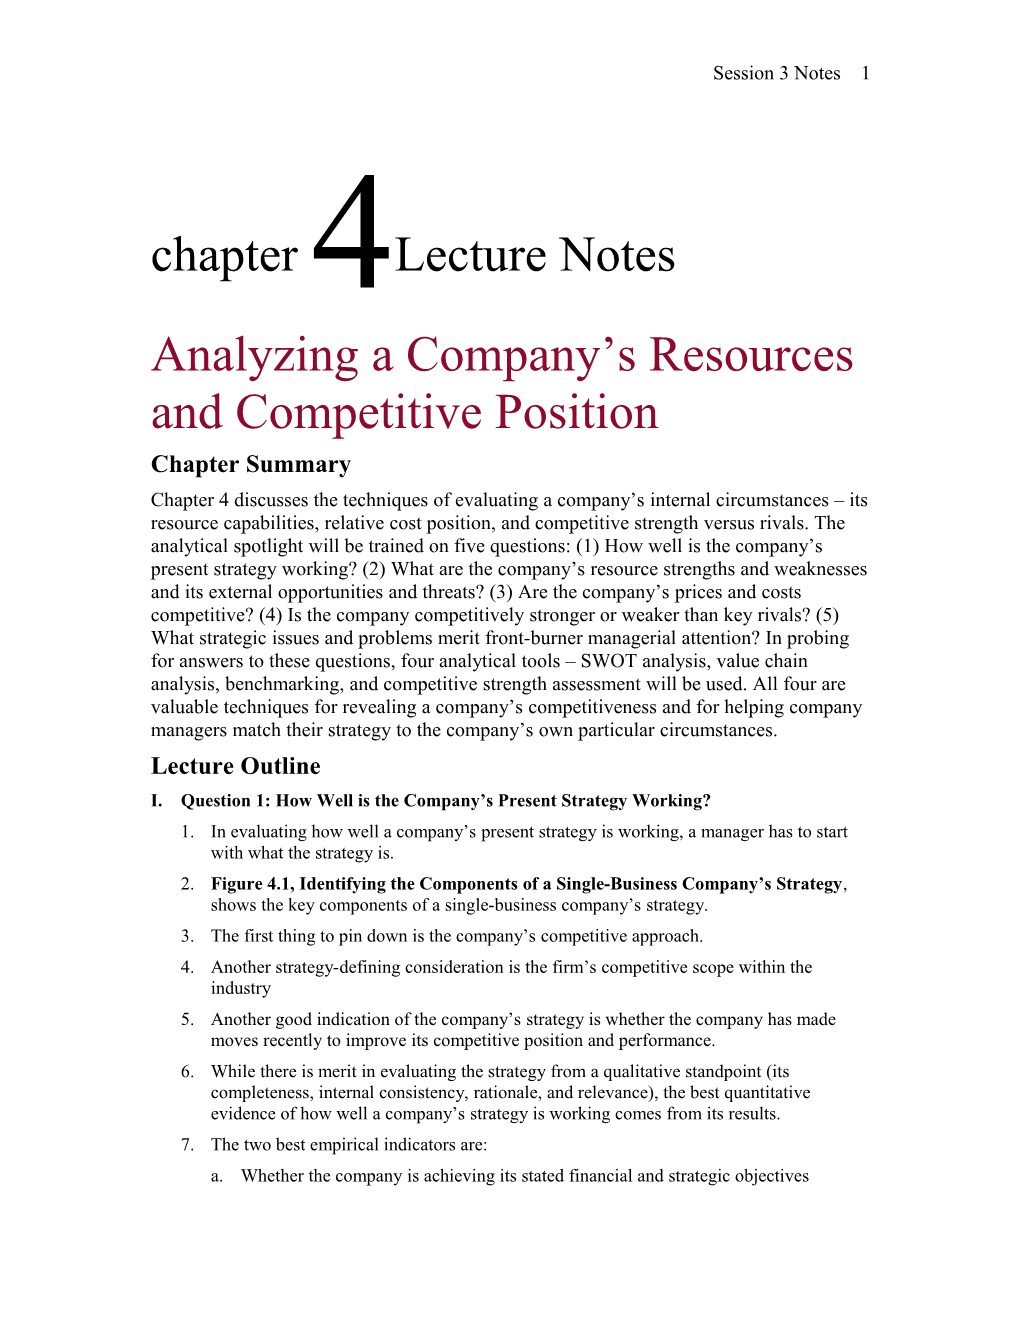 Analyzing a Company S Resources and Competitive Position